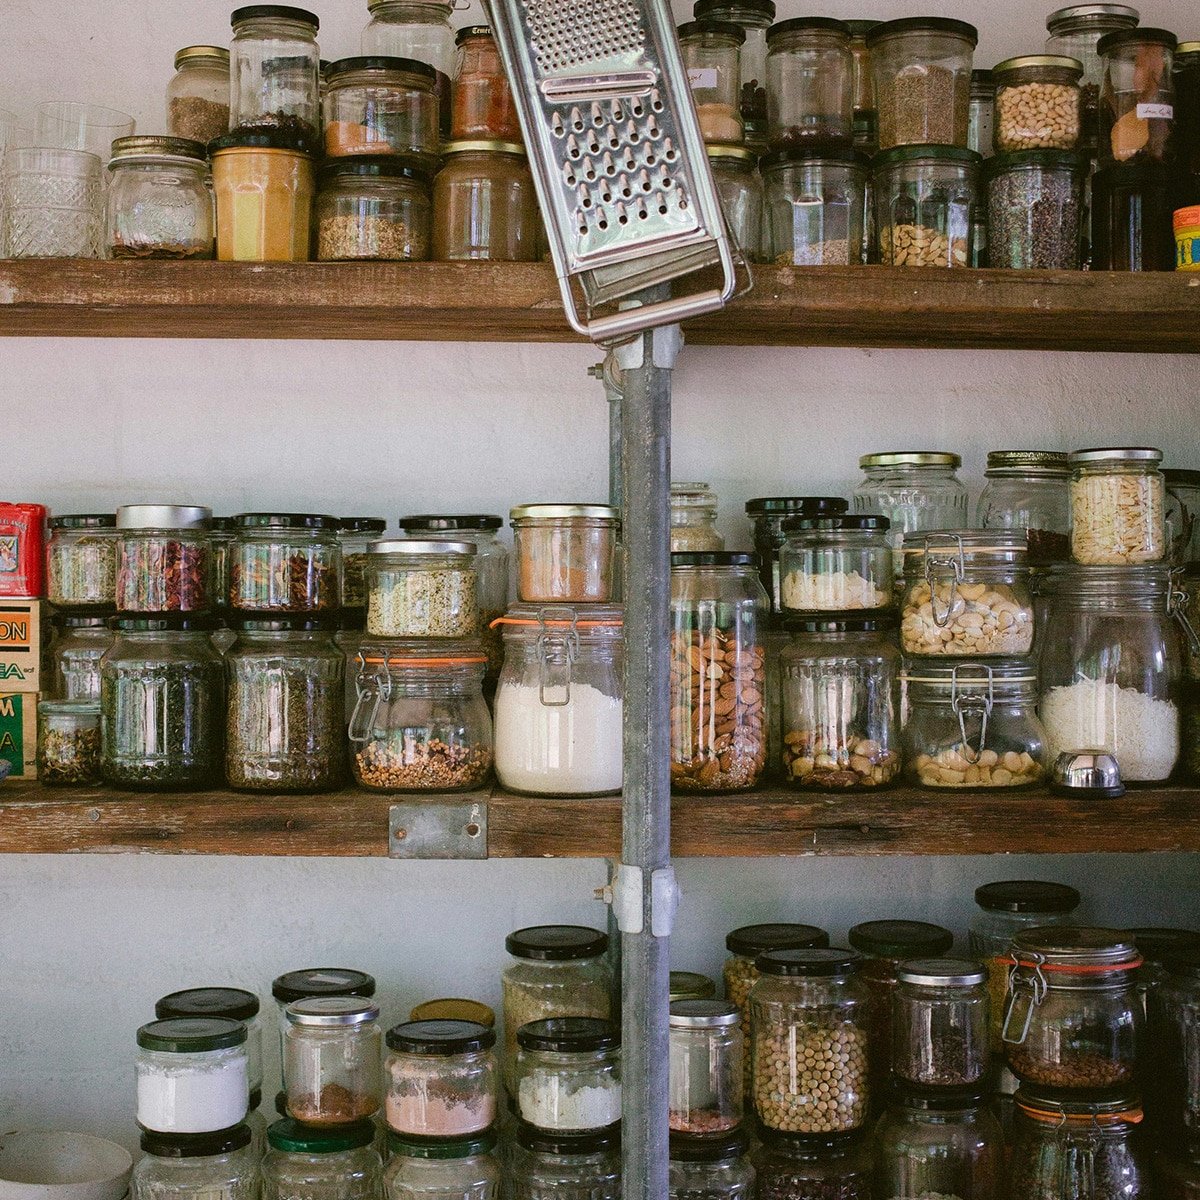 Pantry with glass jars on wooden shelves